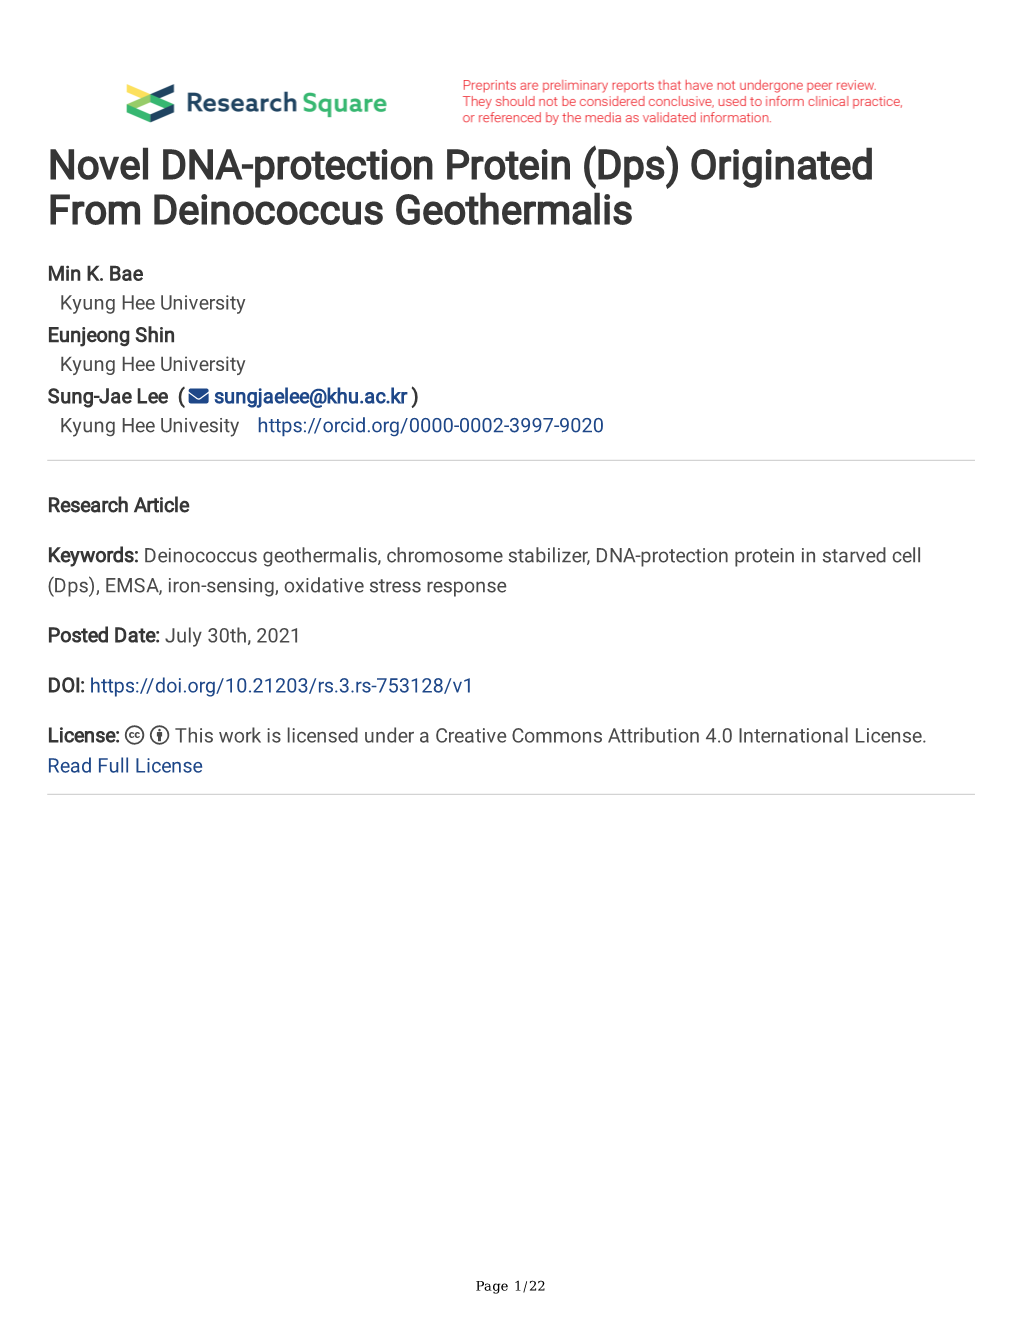 Novel DNA-Protection Protein (Dps) Originated from Deinococcus Geothermalis